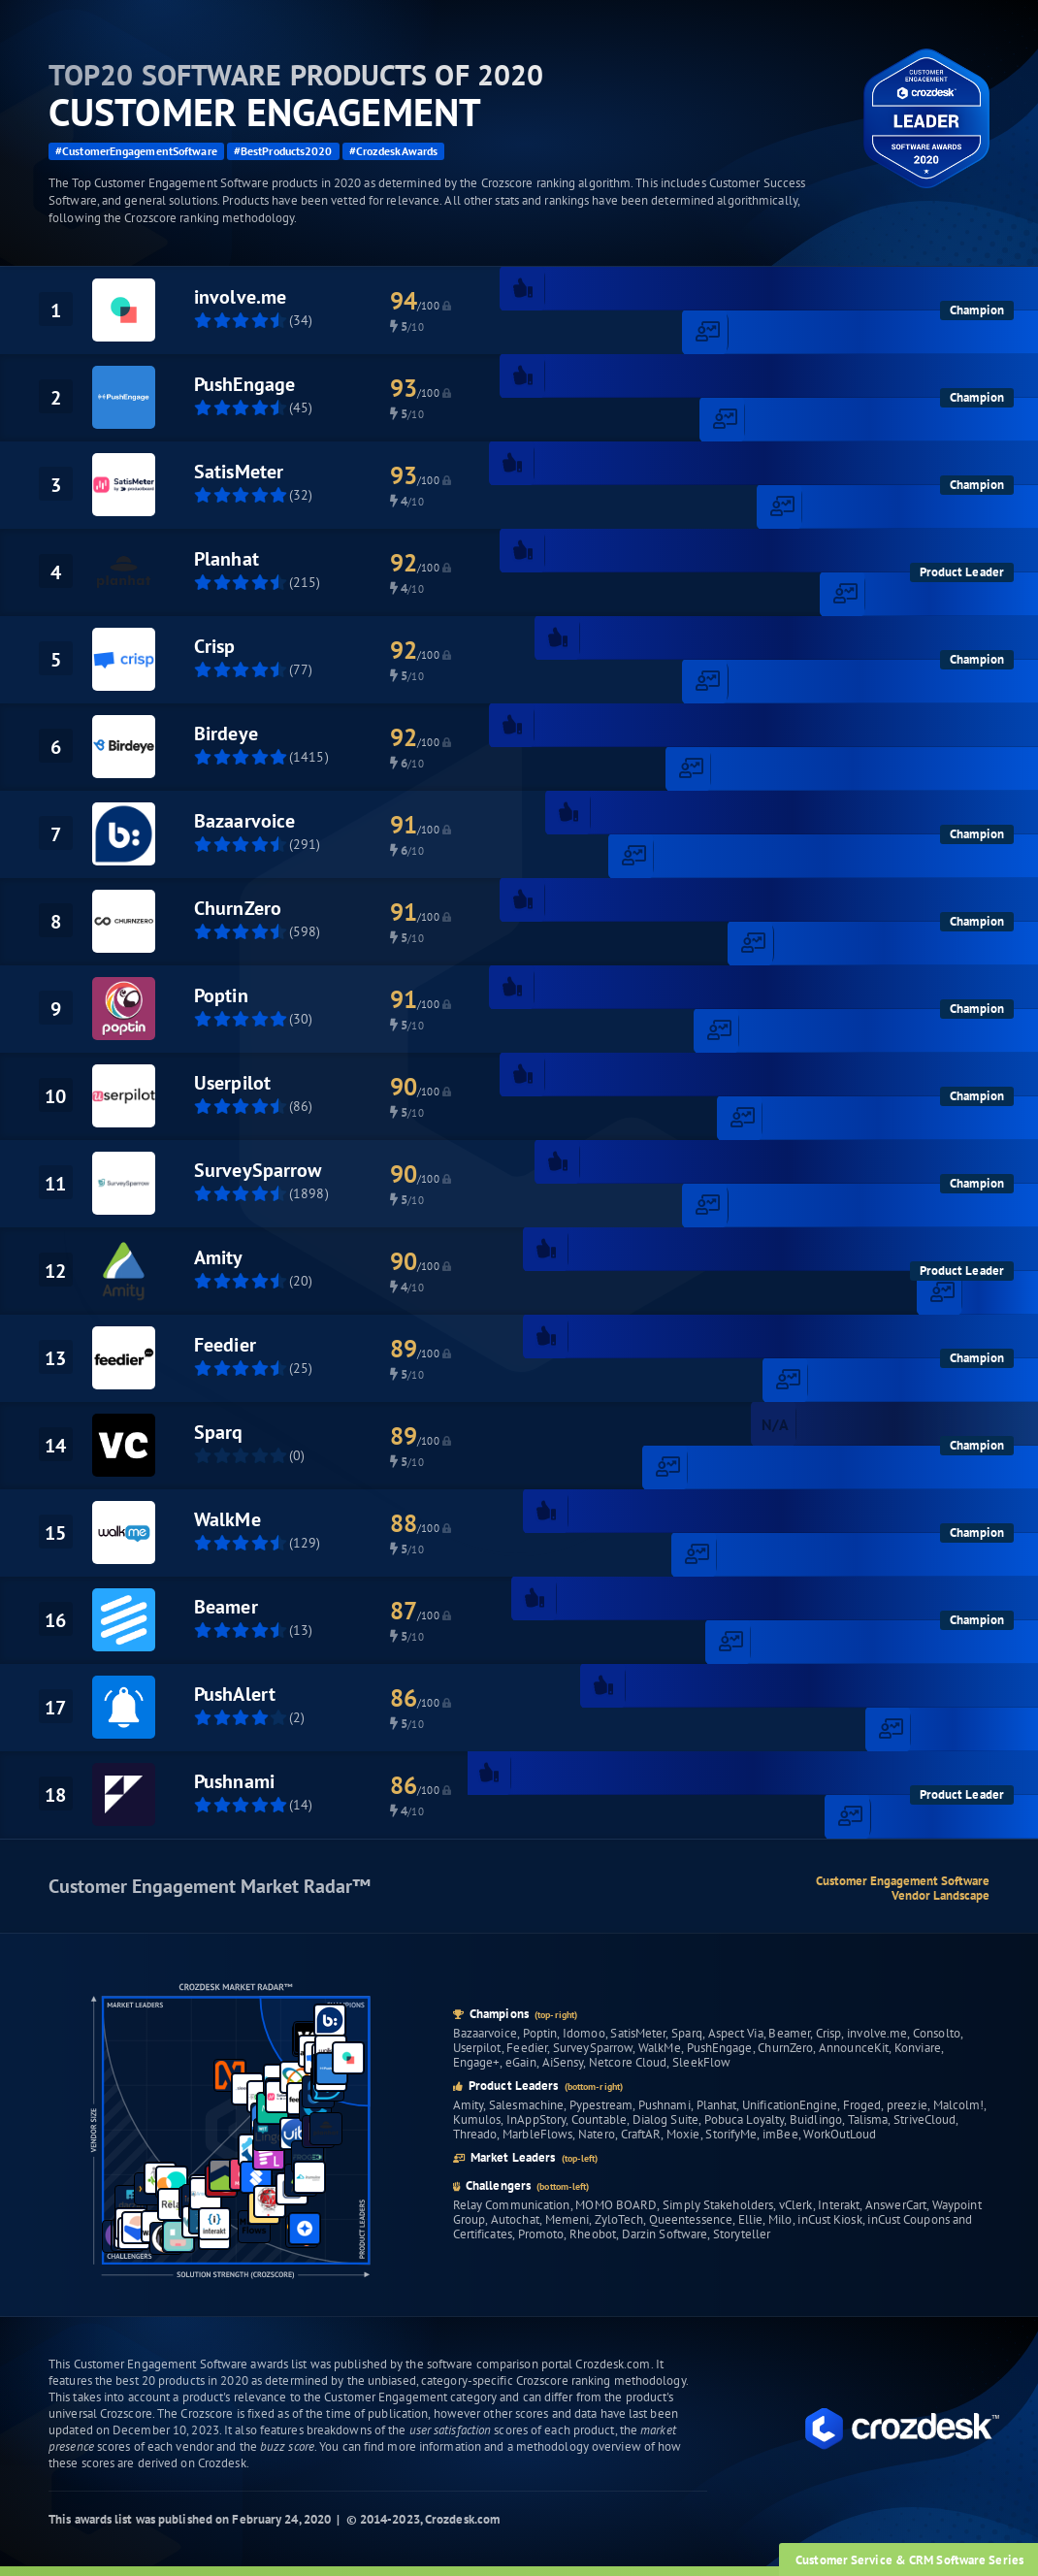 Top 20 Customer Engagement Software of 2020 Infographic